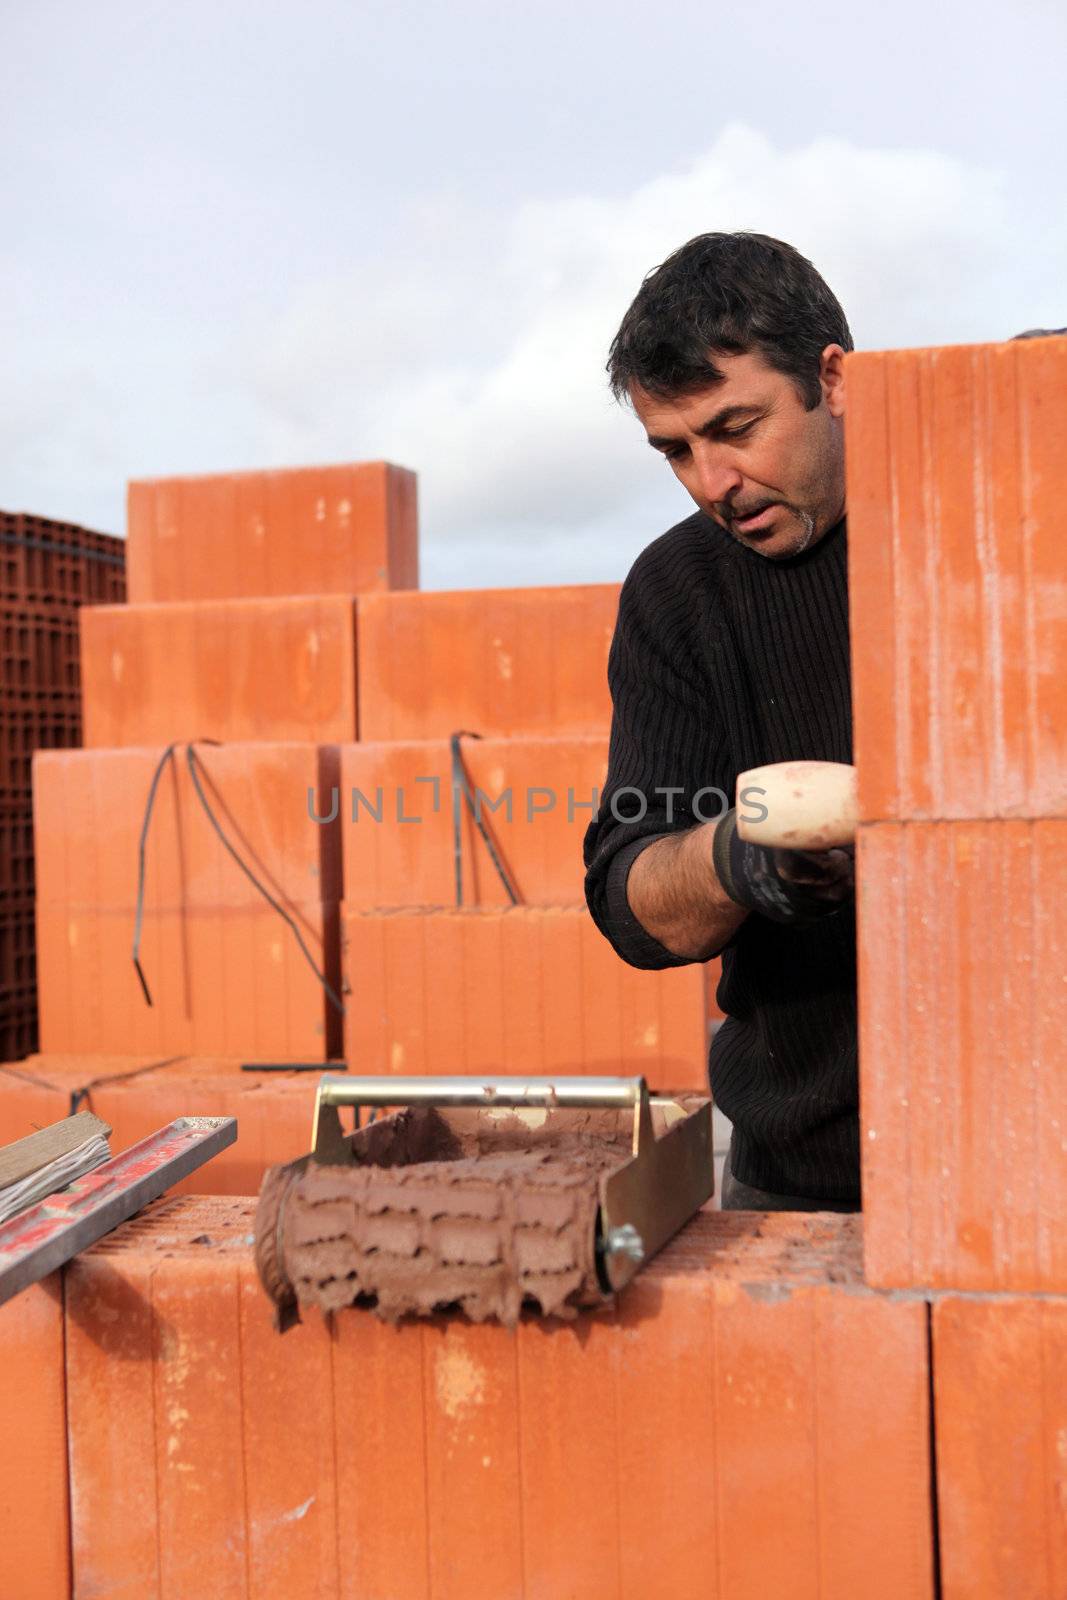 A bricklayer busy at work by phovoir